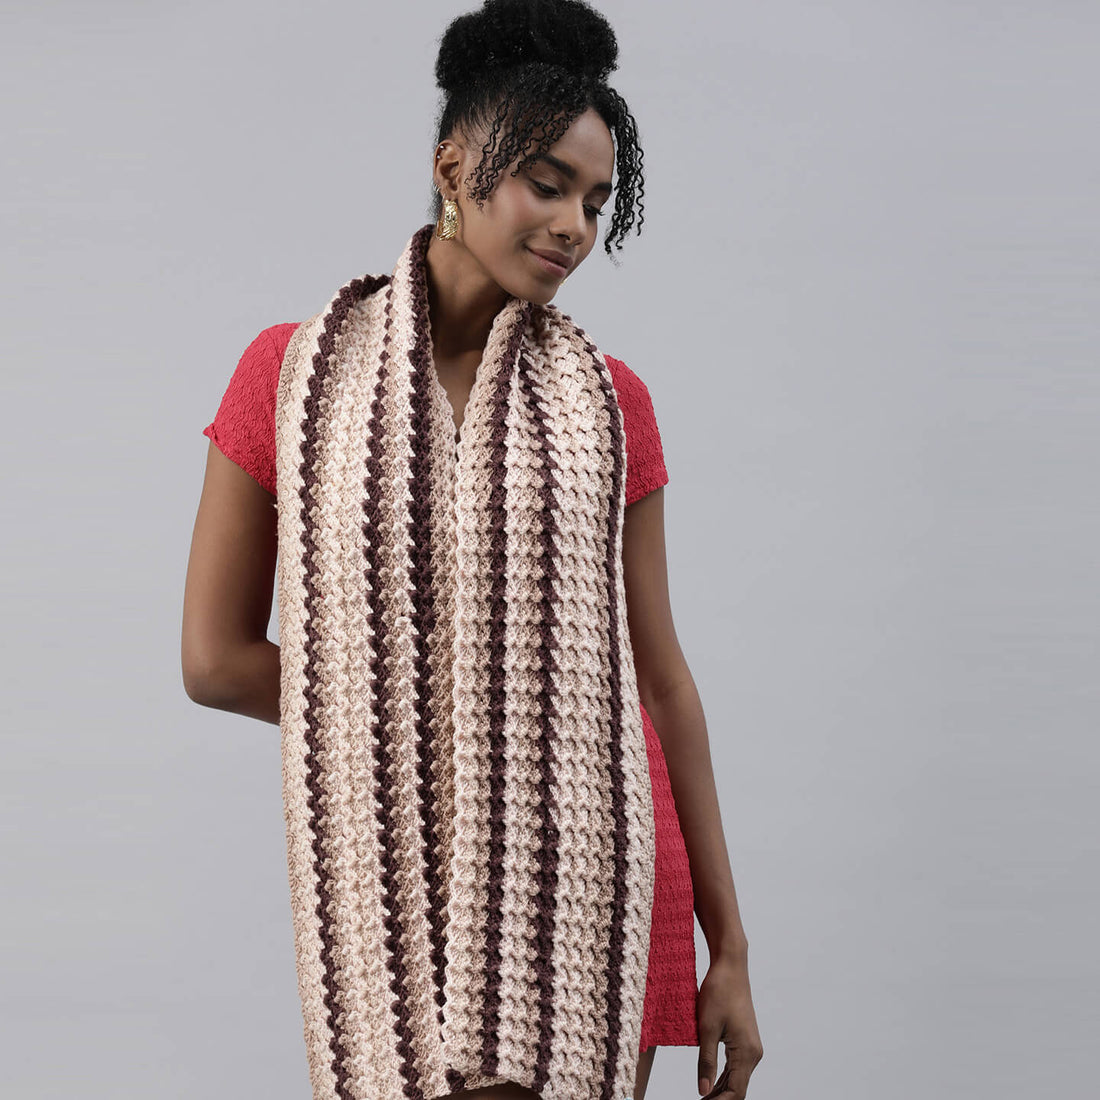 Shades of Brown Scarf - 3098